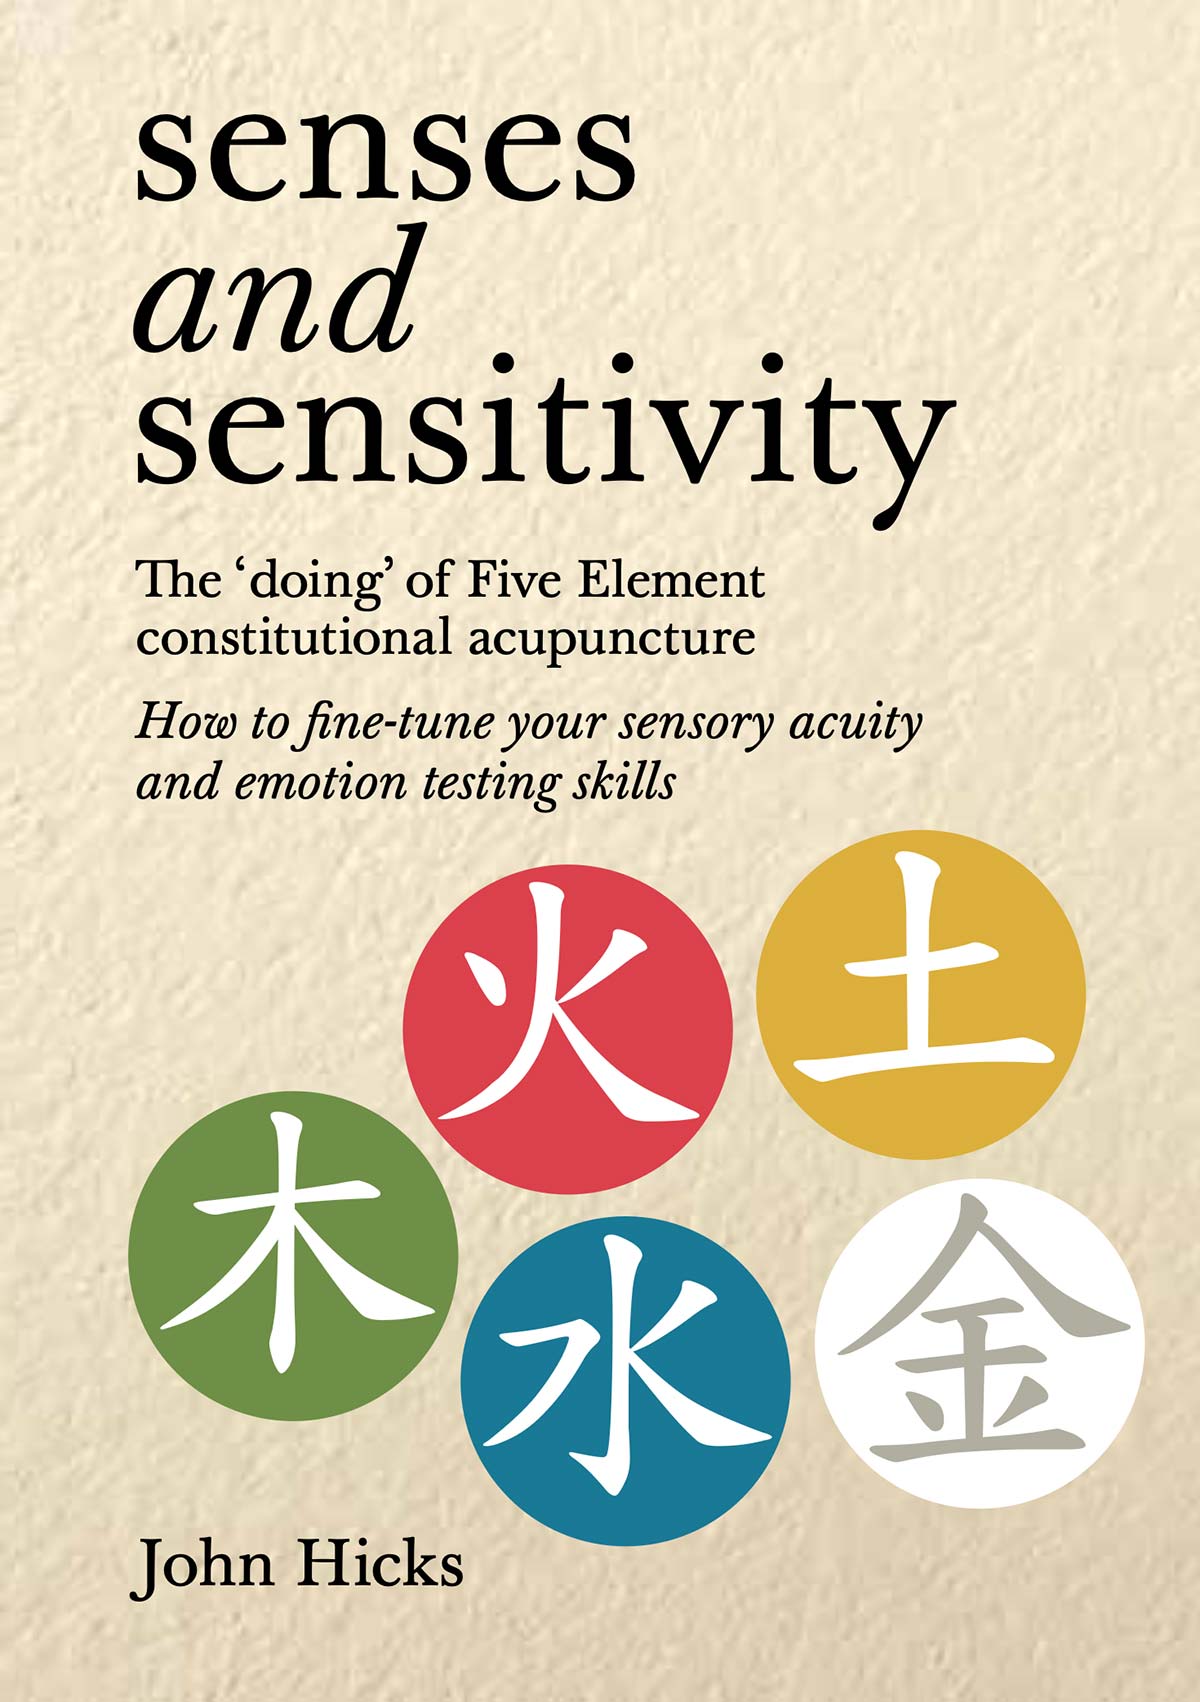 Senses and sensitivity: The ‘doing’ of Five Element constitutional acupuncture